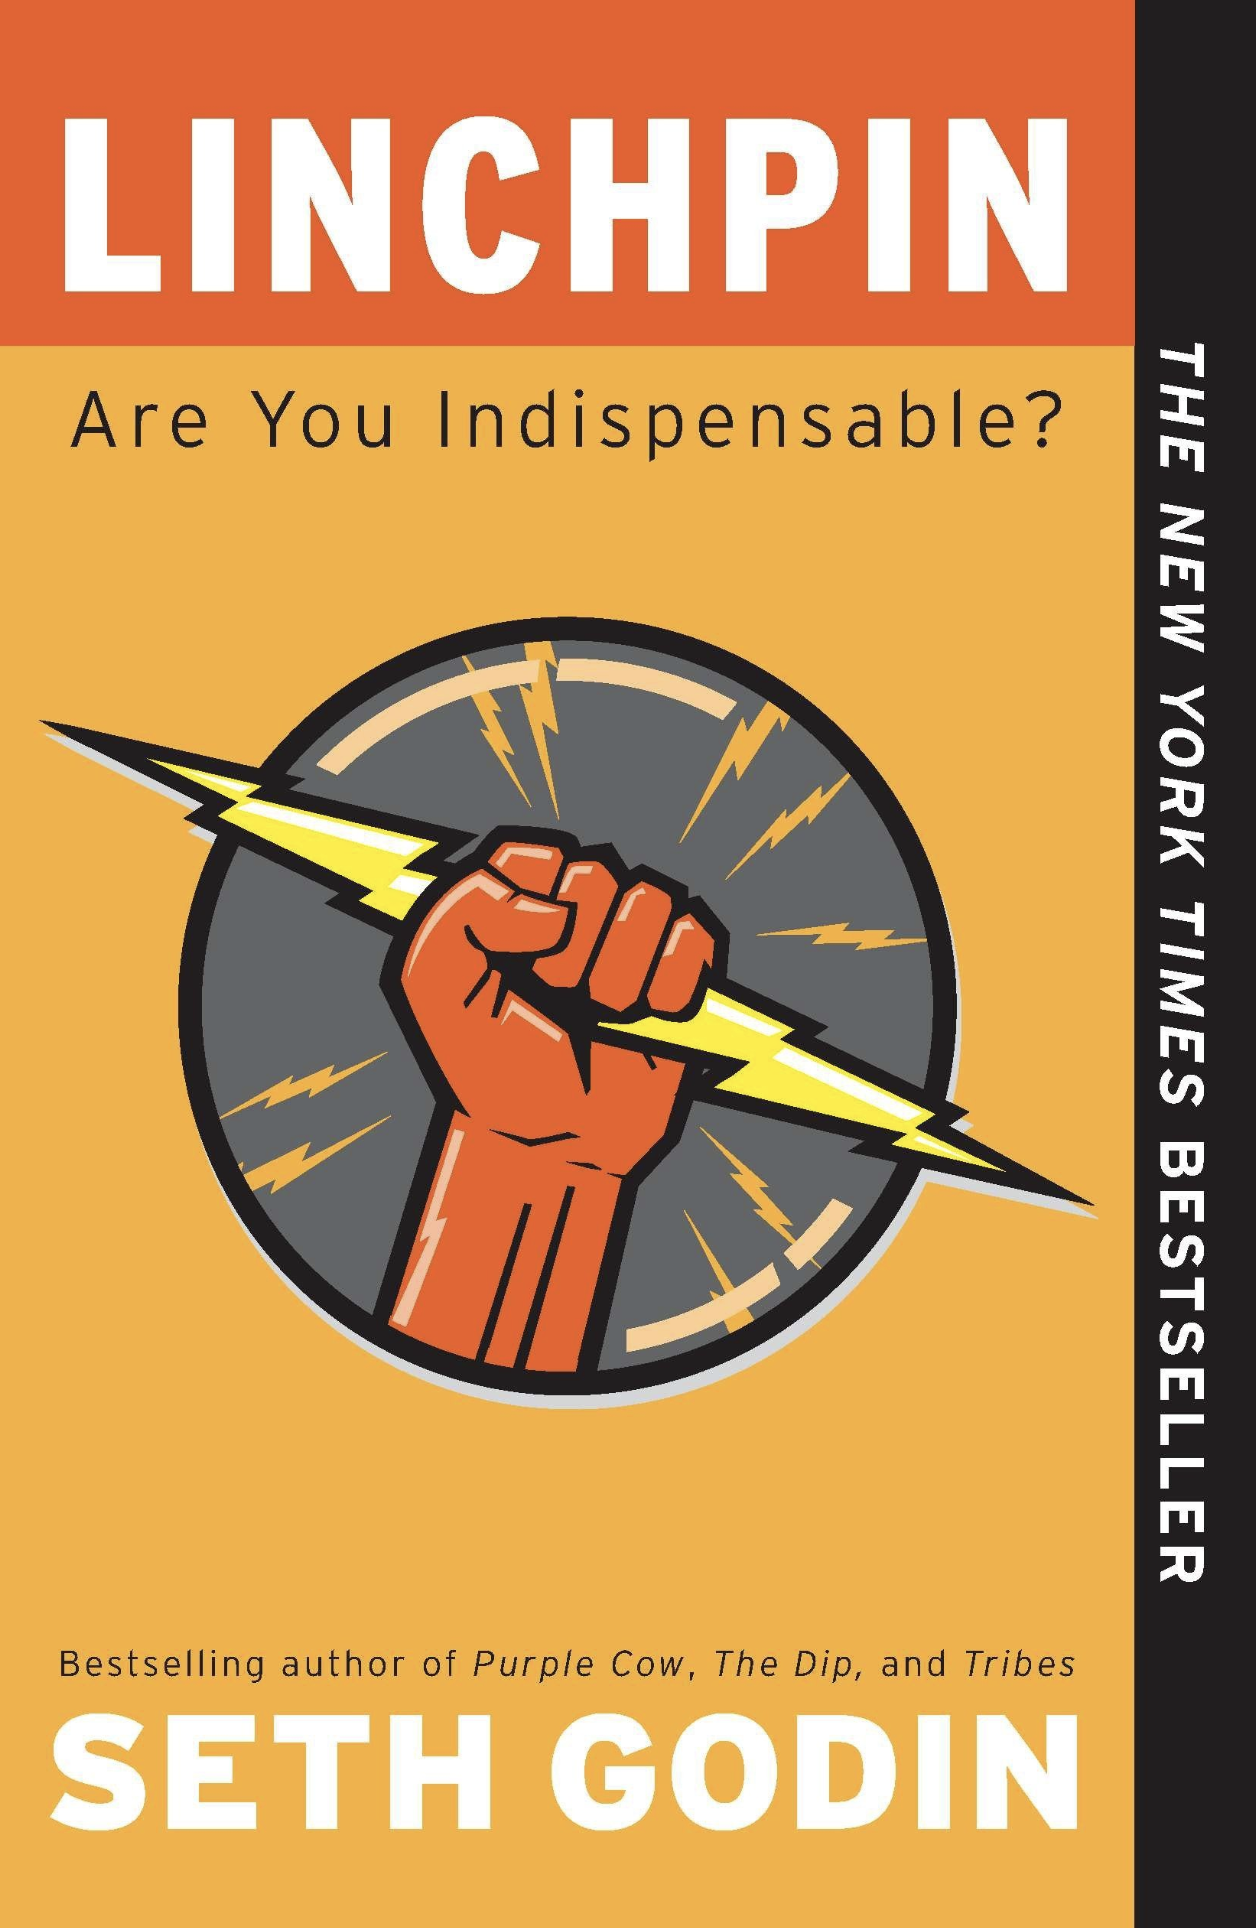 Linchpin: Are You Indispensable by Seth Godin